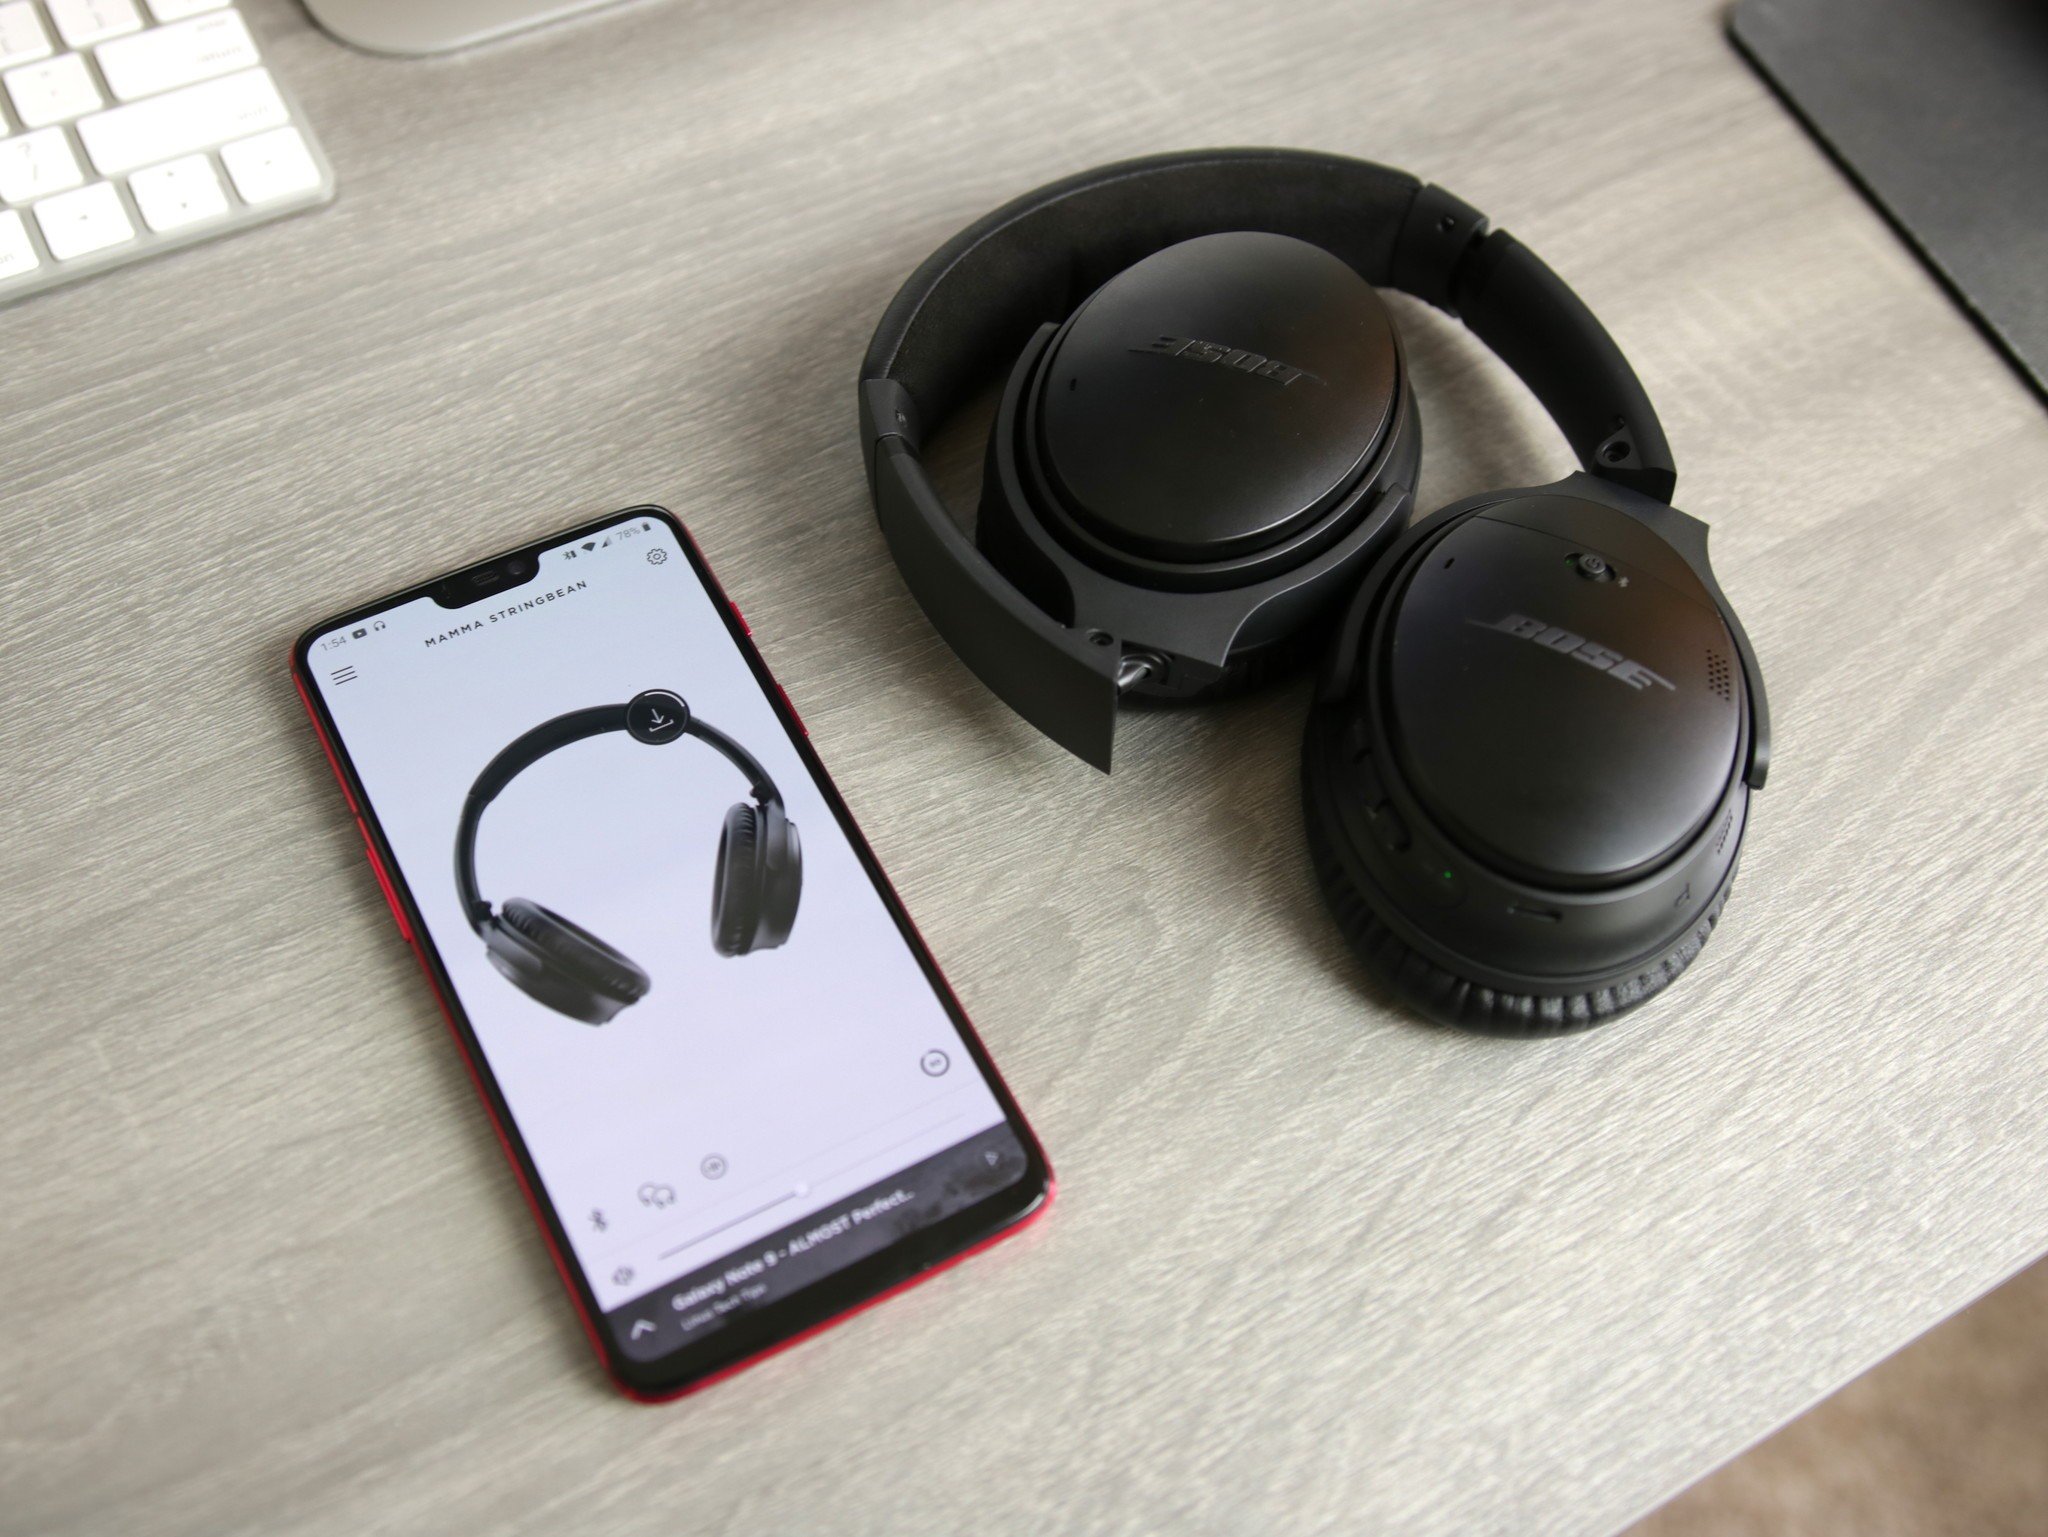 to pair QC 35 with an Android phone | Android Central